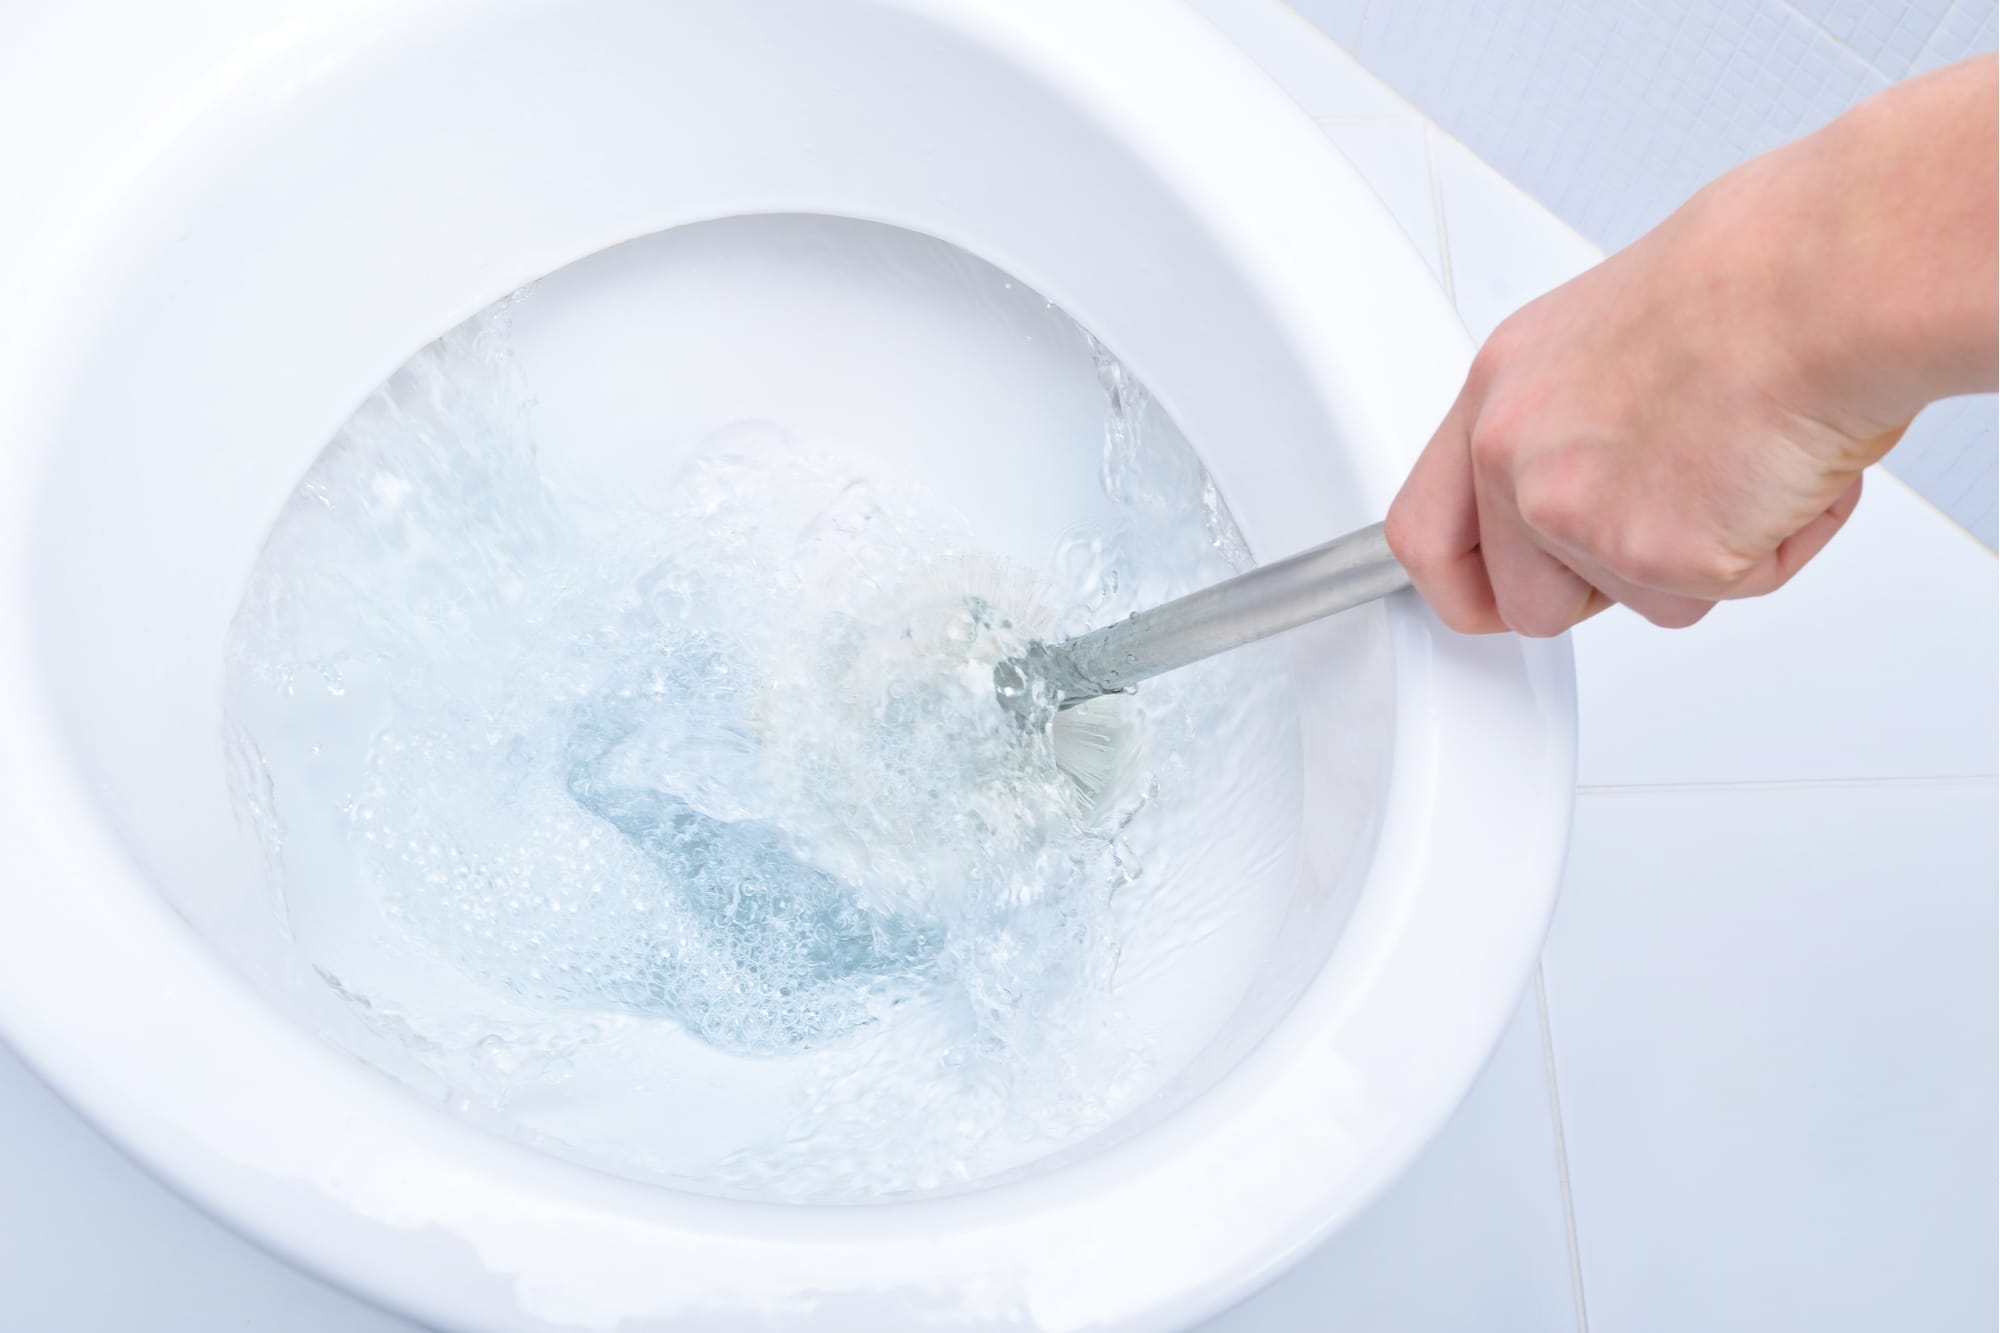 Ways To Keep Your Toilet Brush Holder Clean and Sanitized